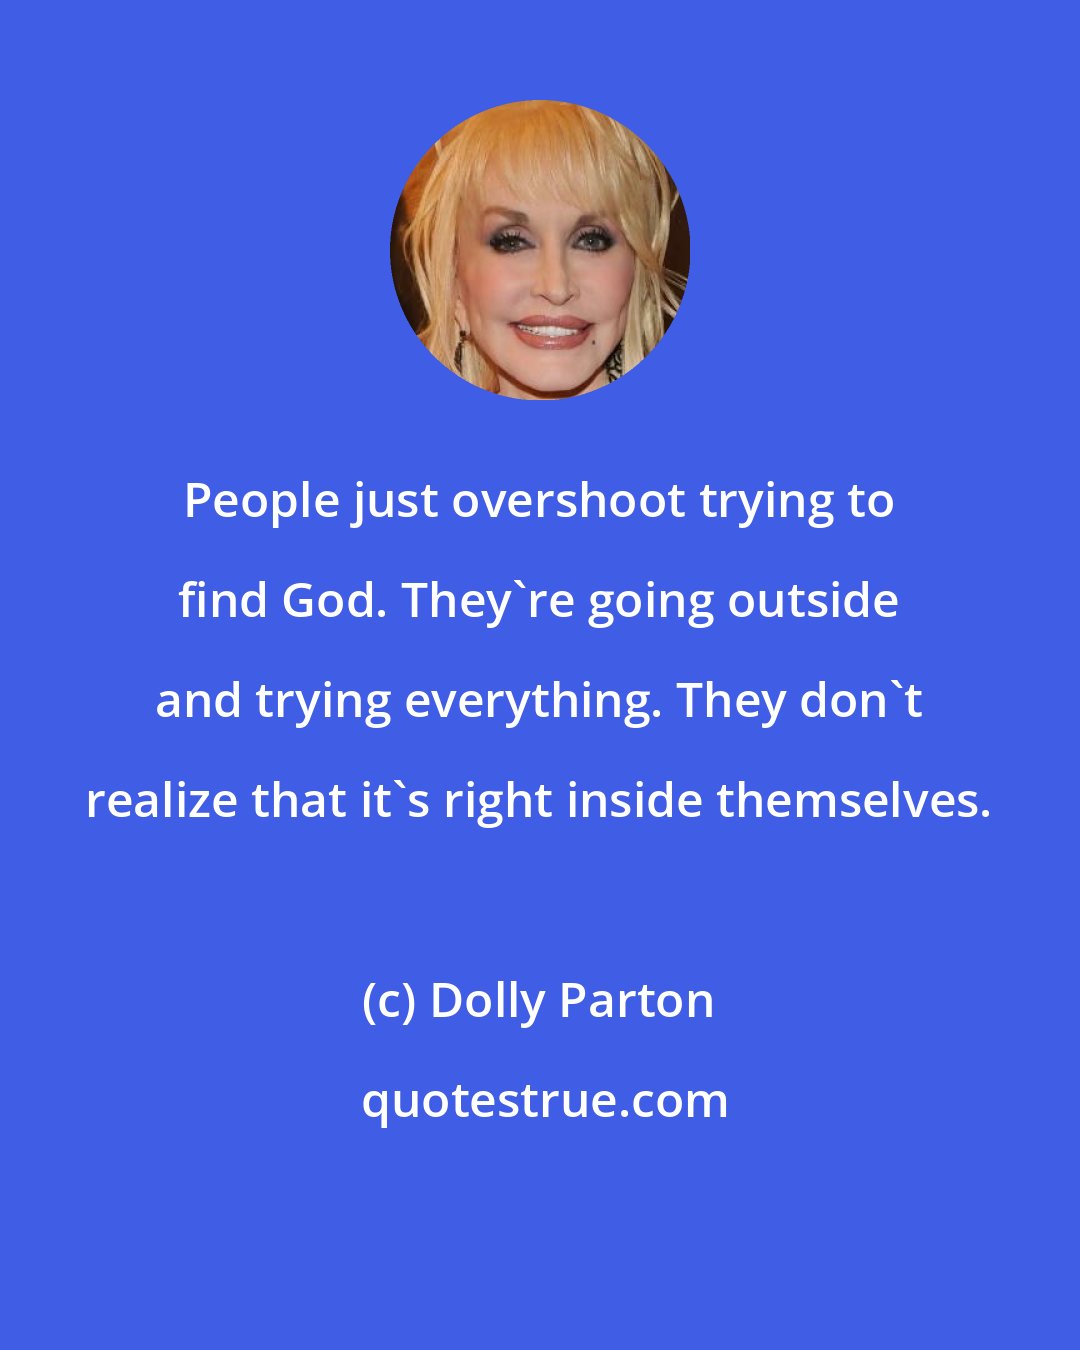 Dolly Parton: People just overshoot trying to find God. They're going outside and trying everything. They don't realize that it's right inside themselves.